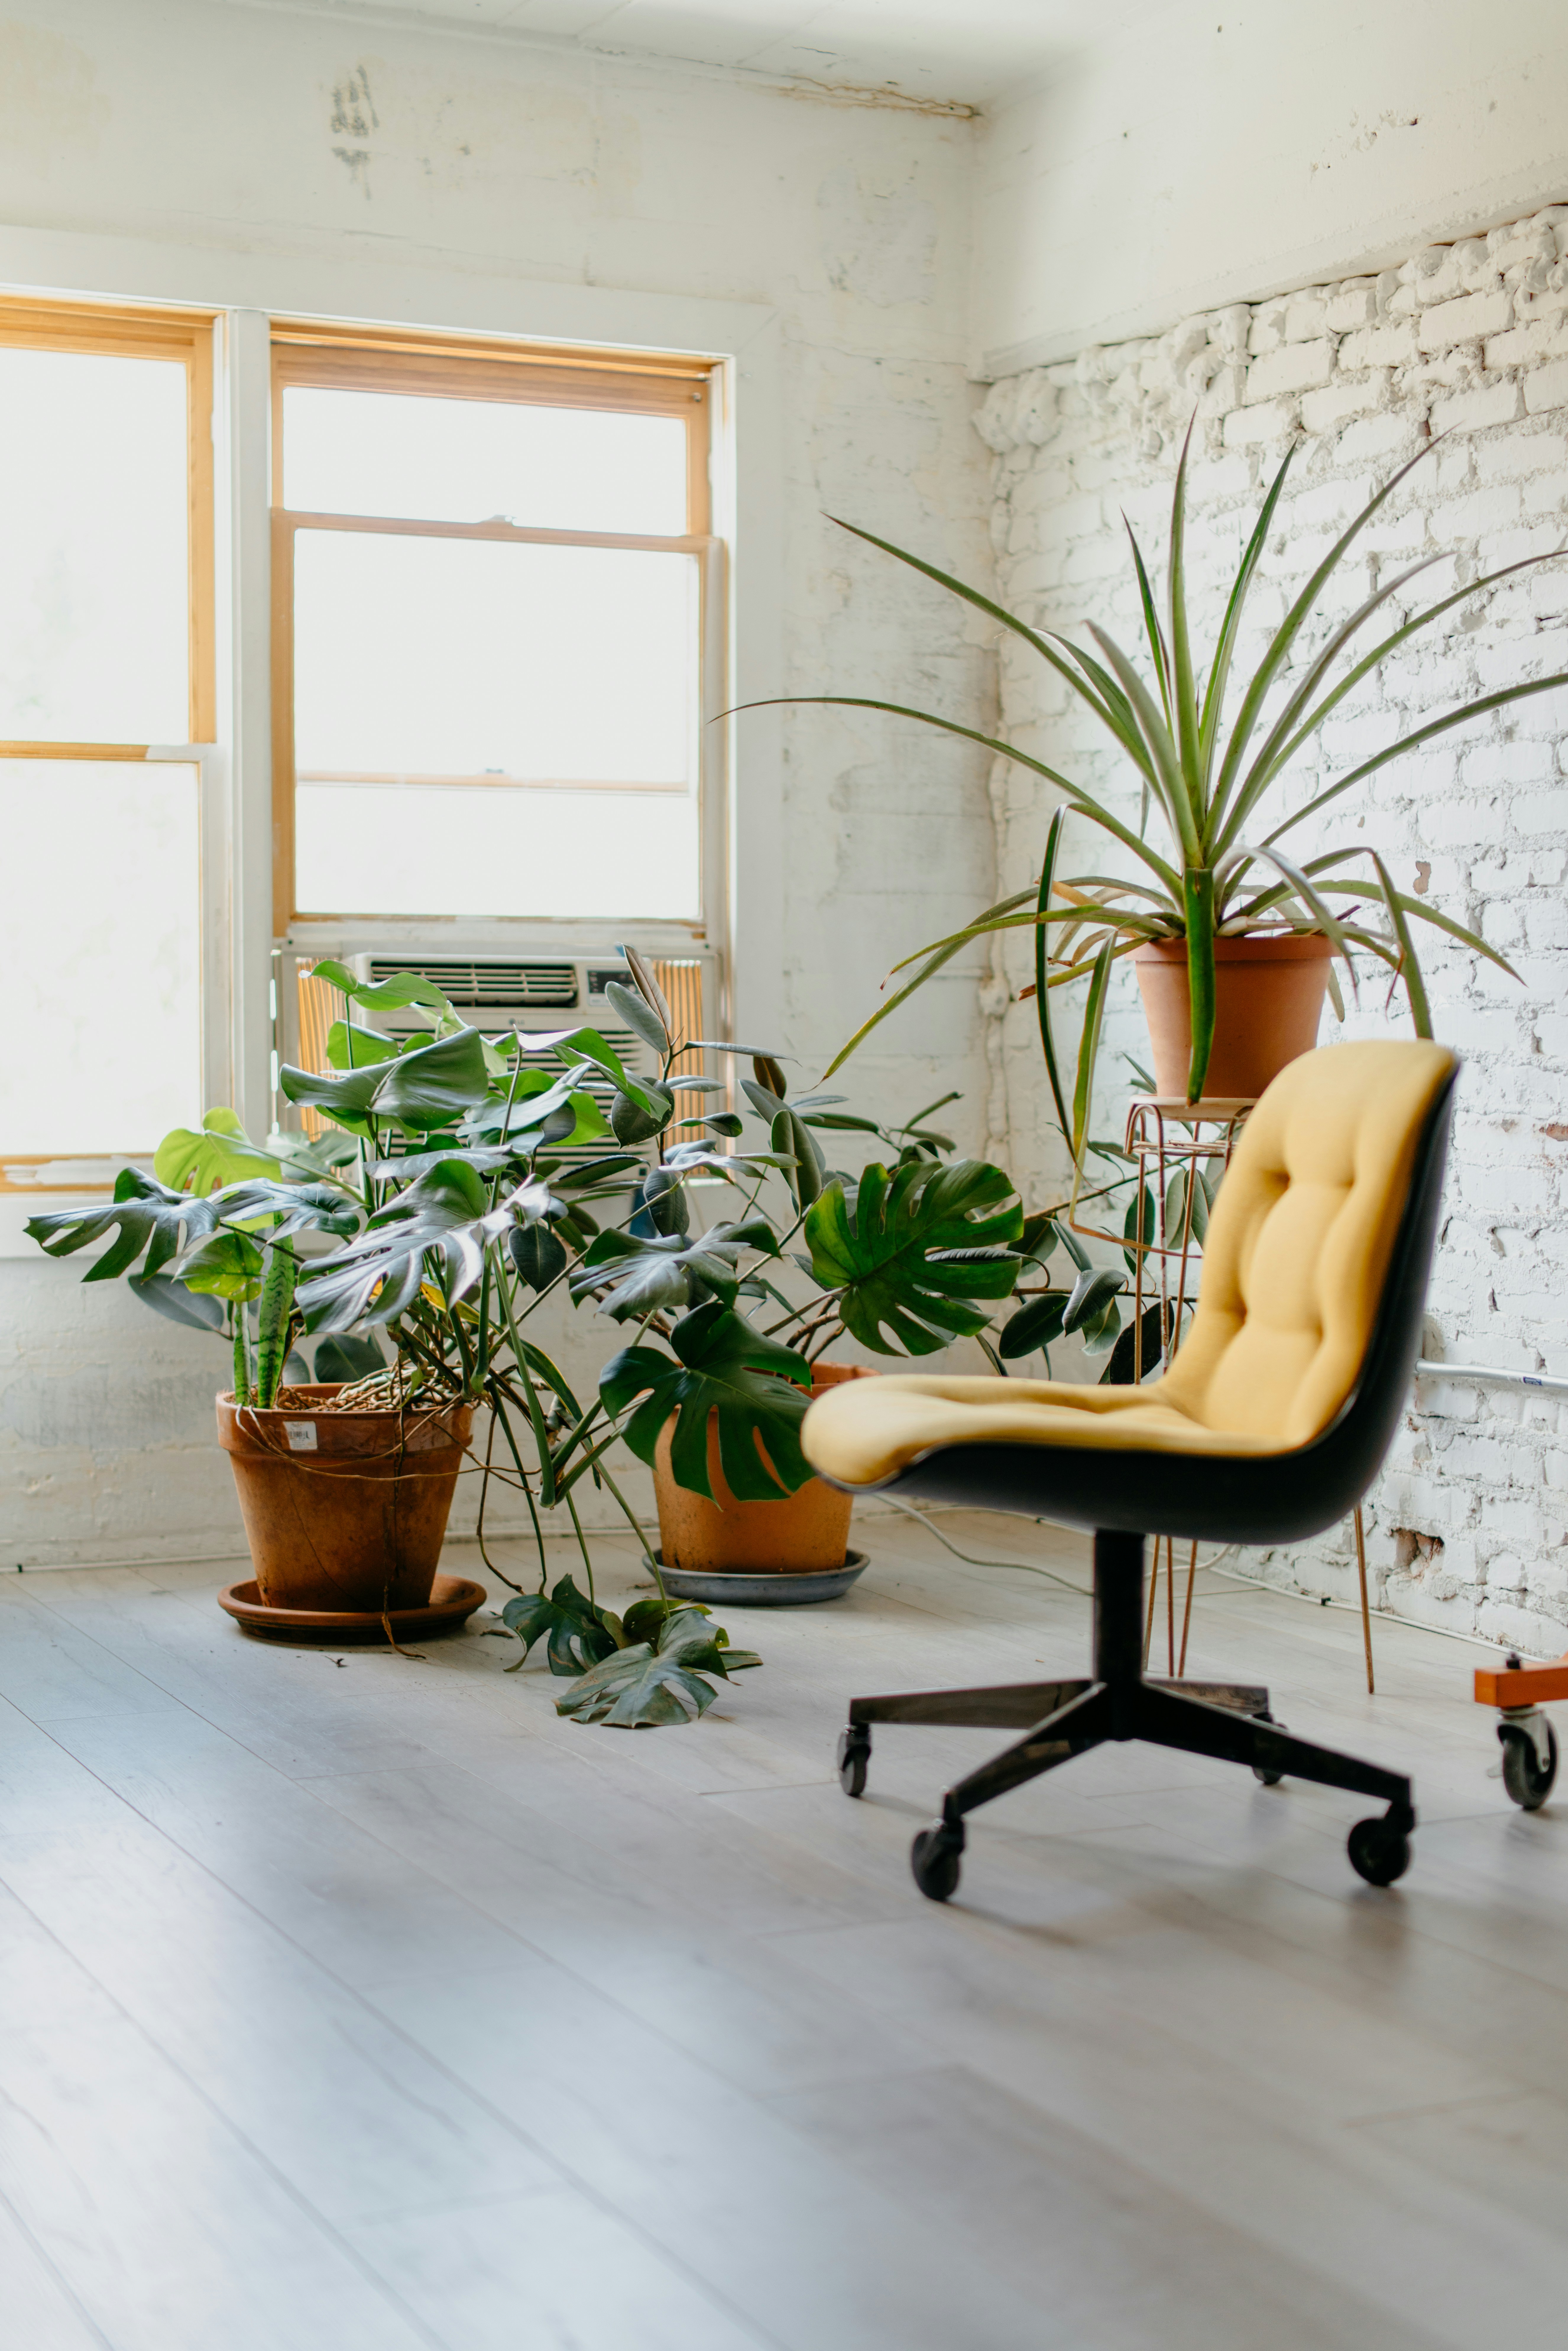 yellow rolling chair next to plants. business coach for therapists in frisco, texas to increase rates. best trauma therapist in frisco, texas.